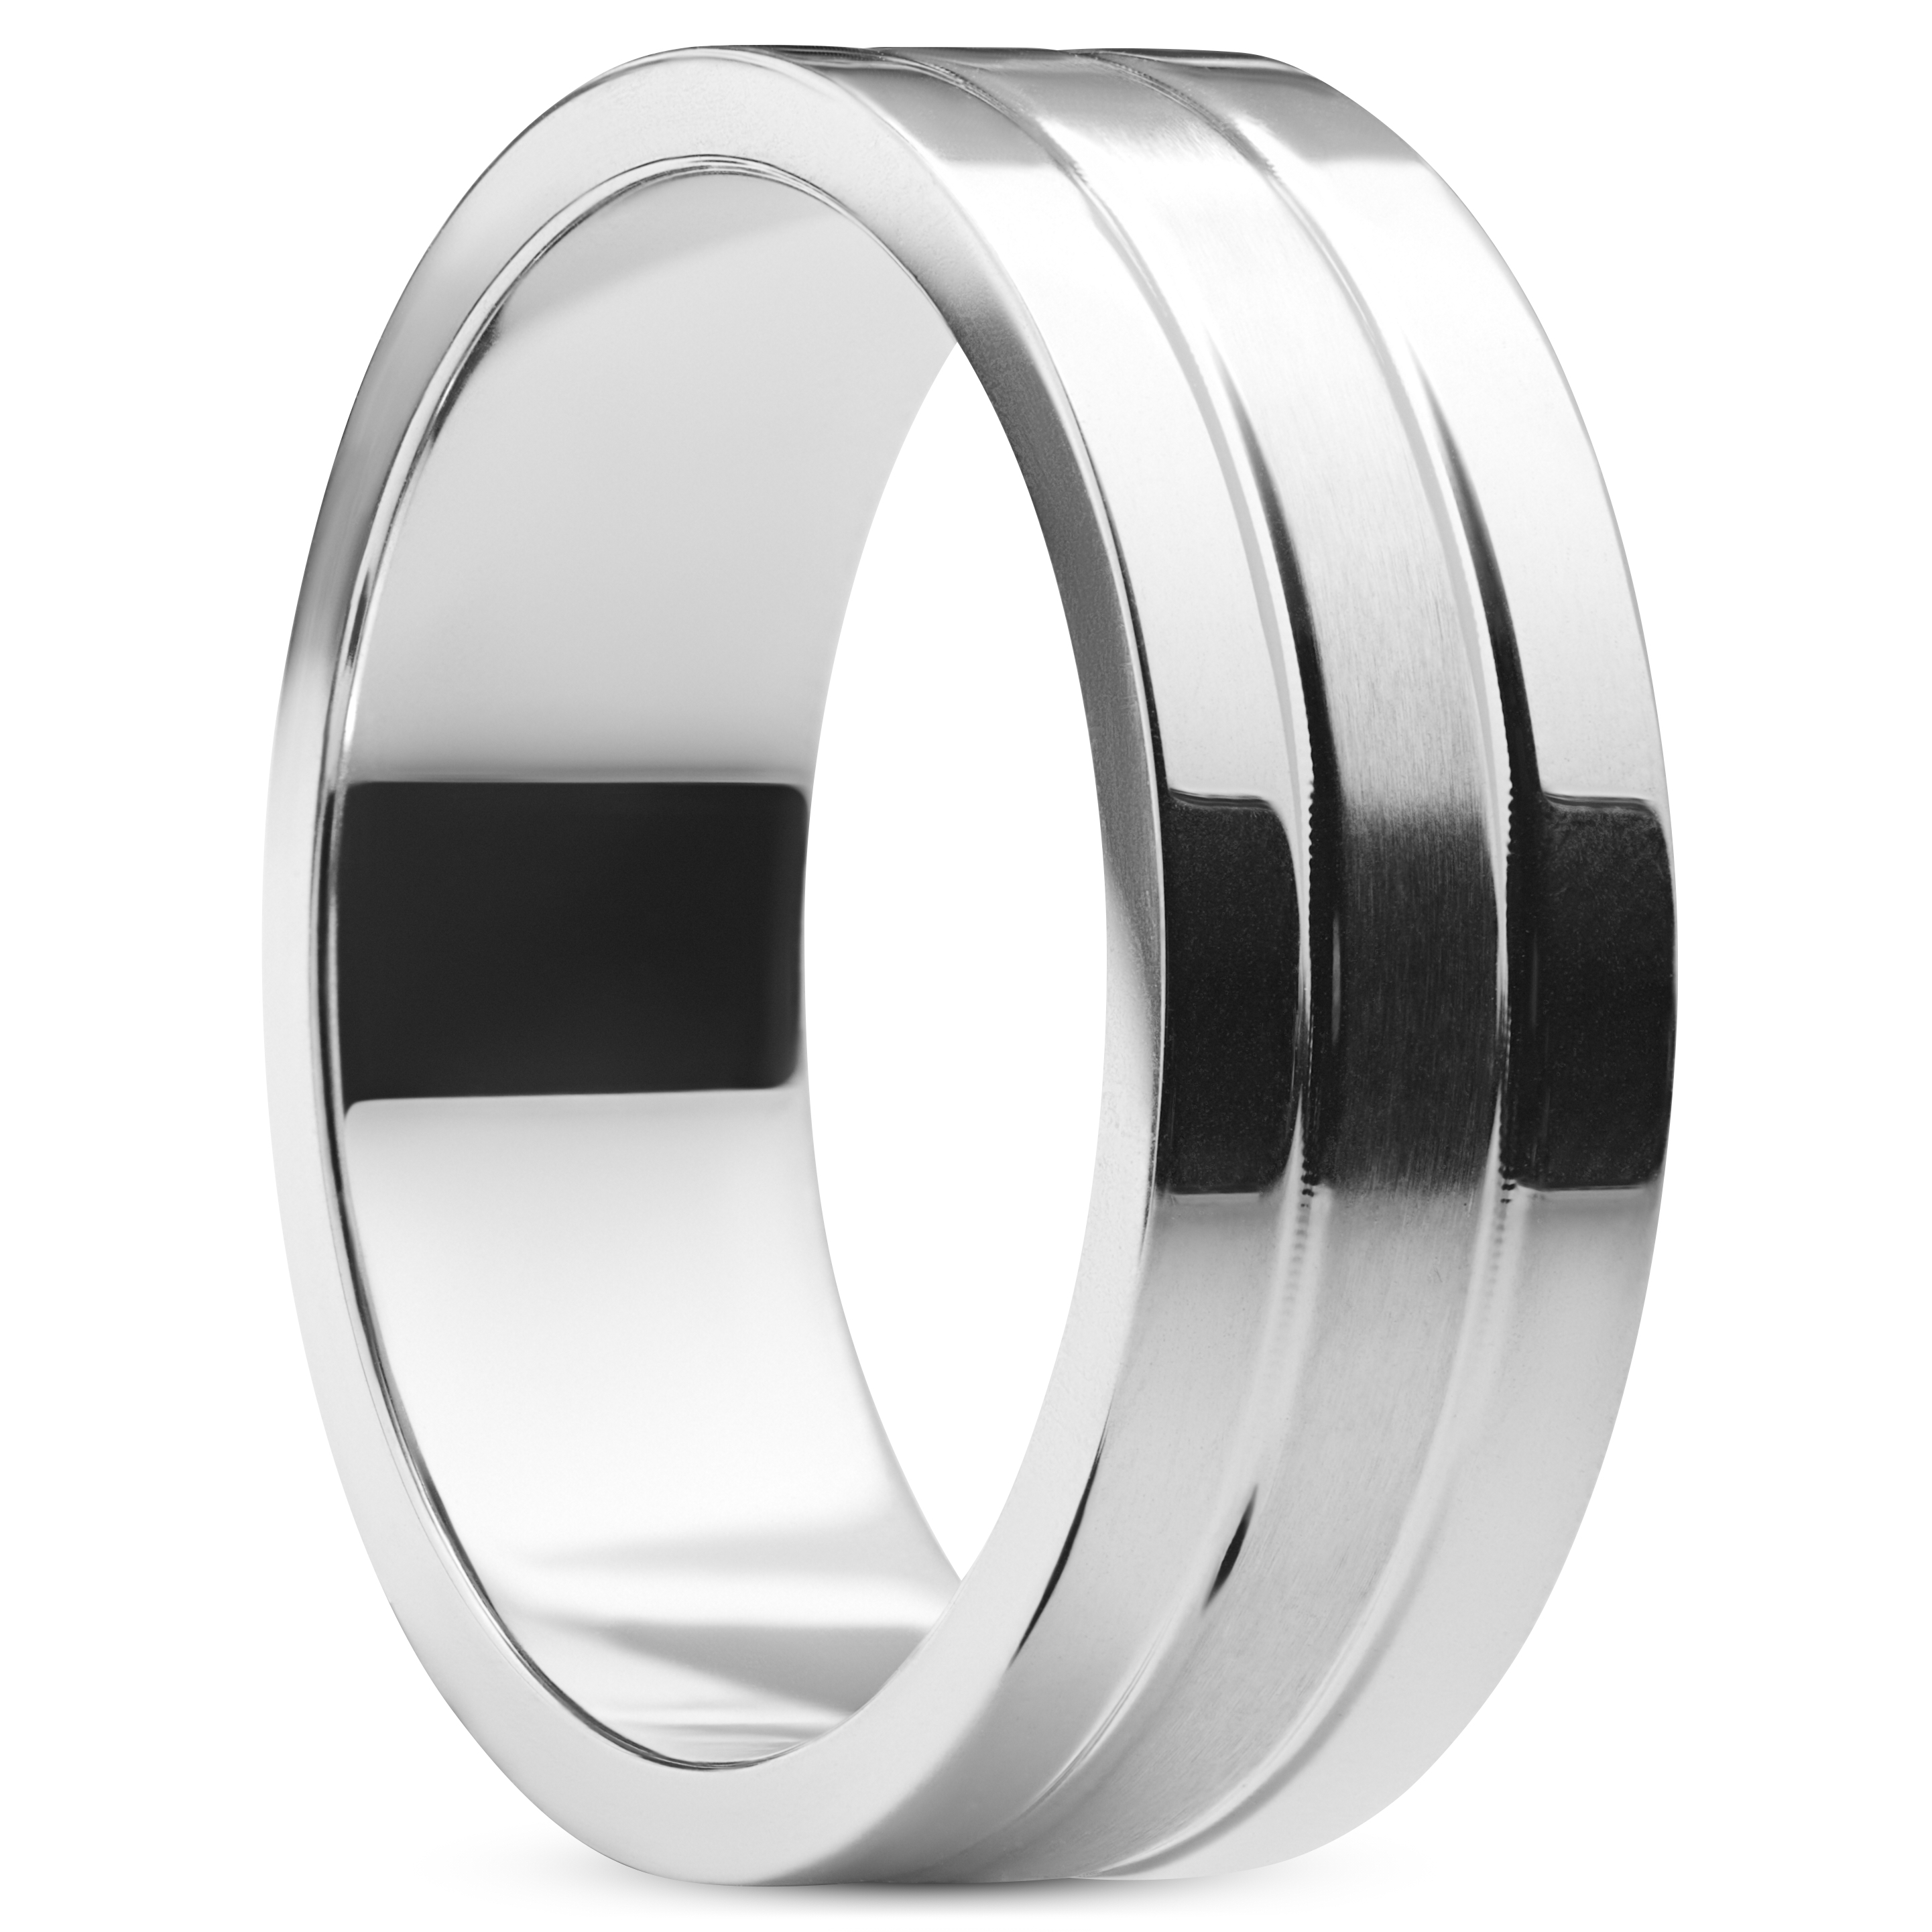 Buy FOREVER BLINGS Ring for Men Stainless Steel Black Gold Silver 3Pcs Band  Ring Combo for Men & Women - (3 Pc Band_01) at Amazon.in